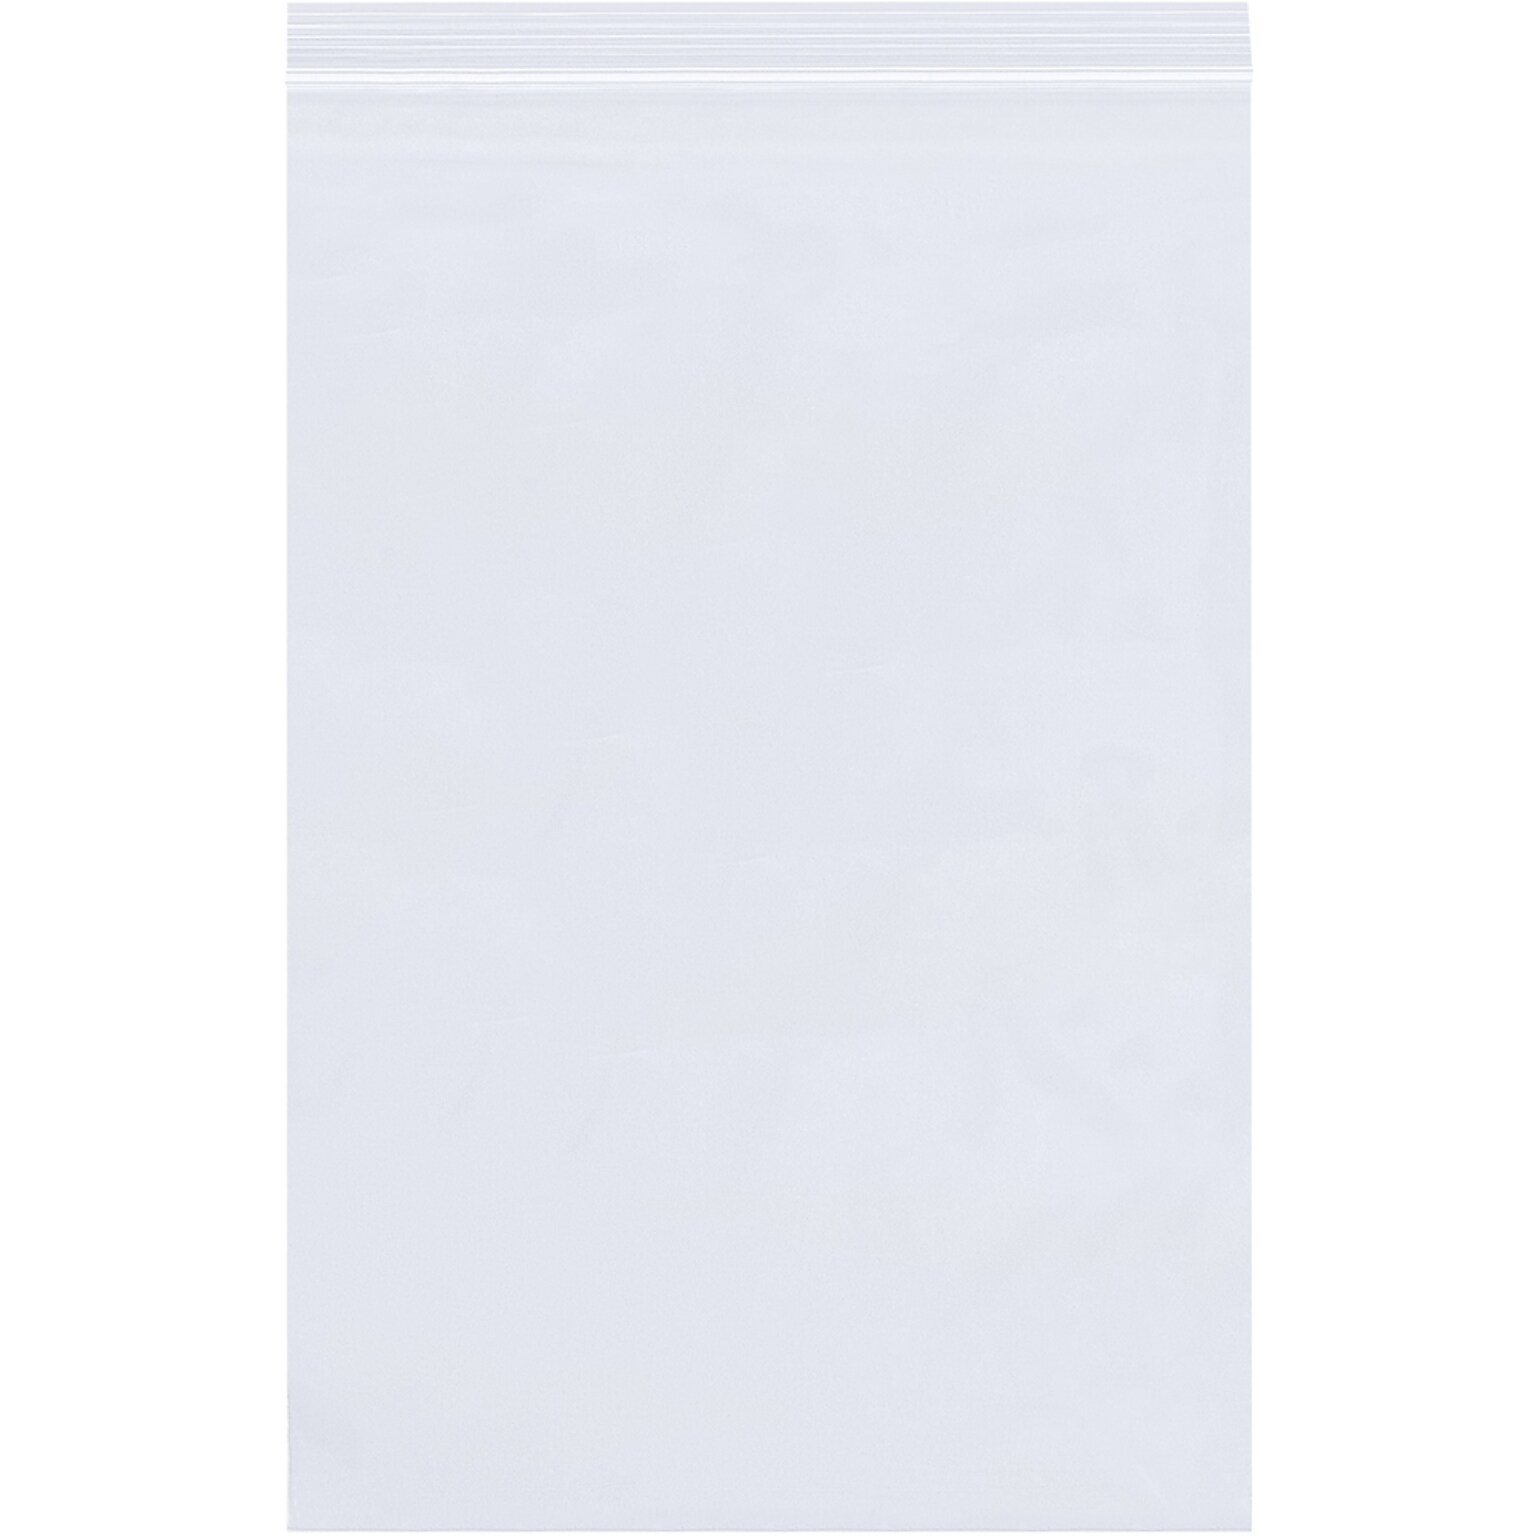 13 x 16 Reclosable Poly Bags, 4 Mil, Clear, 500/Carton (PB4243)